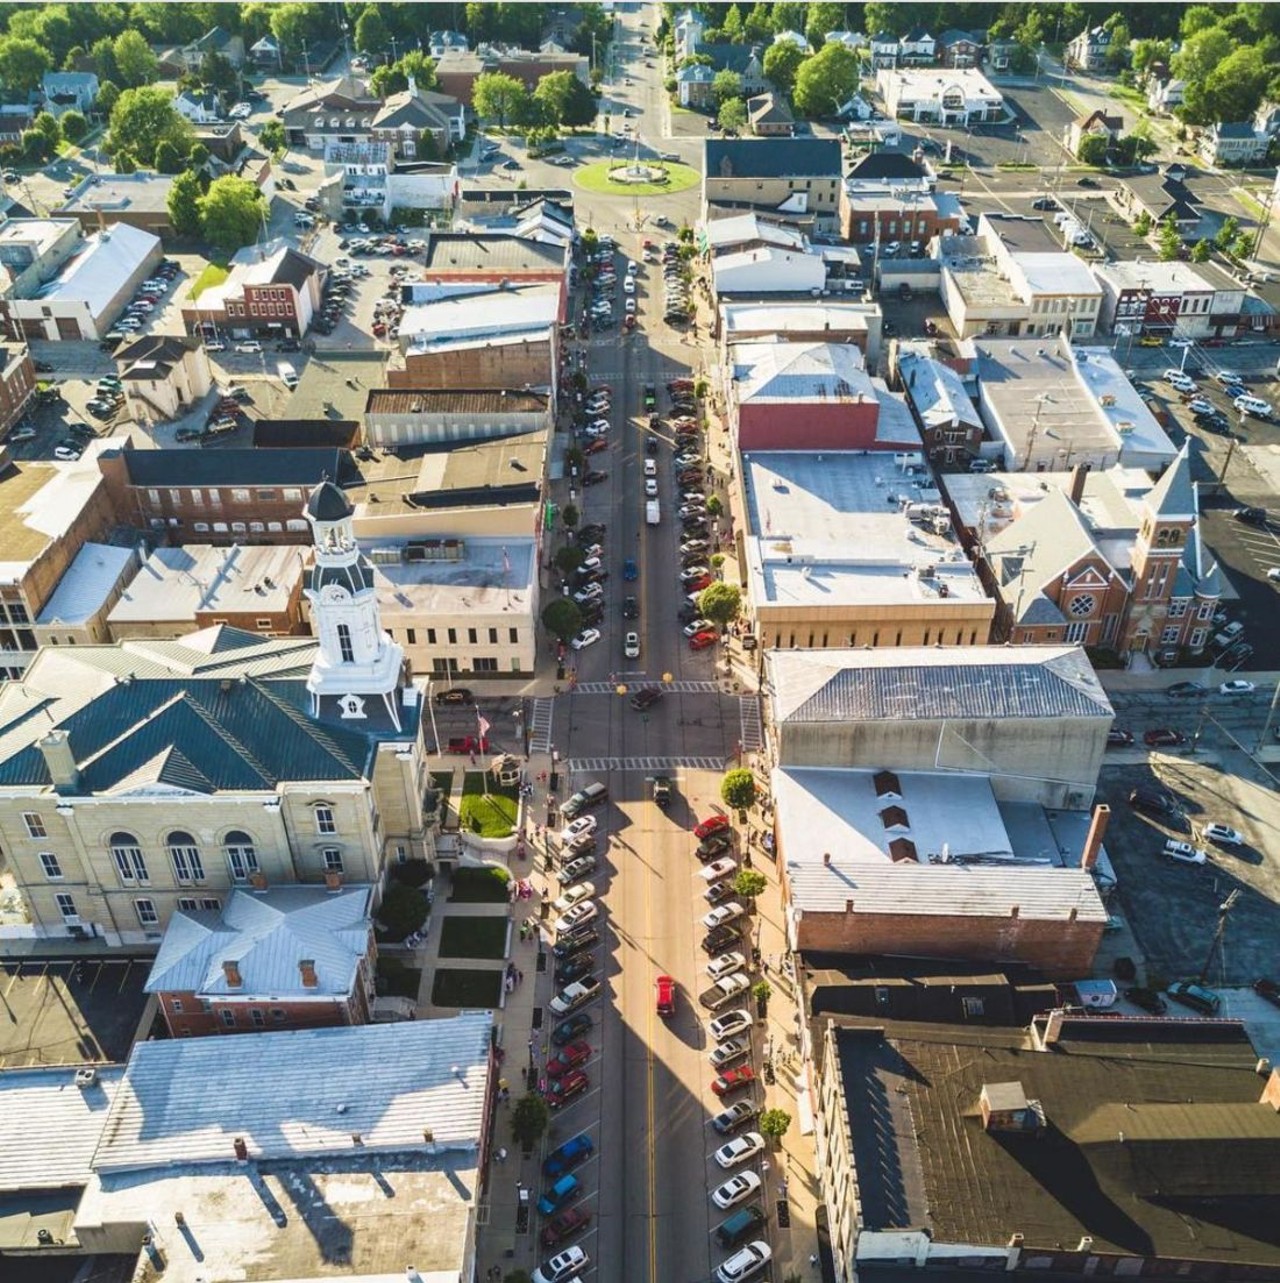 Take a daytrip to a small town
Greenville, Ohio pictured above.
Ohio has a bunch of small towns that are worth visiting and easily accessible. Drive to Geneva on the Lake or Put In Bay if you're looking for a summer beach town vibe. Wooster is also a great spot for foodies.
Photo via  michaelless/Instagram